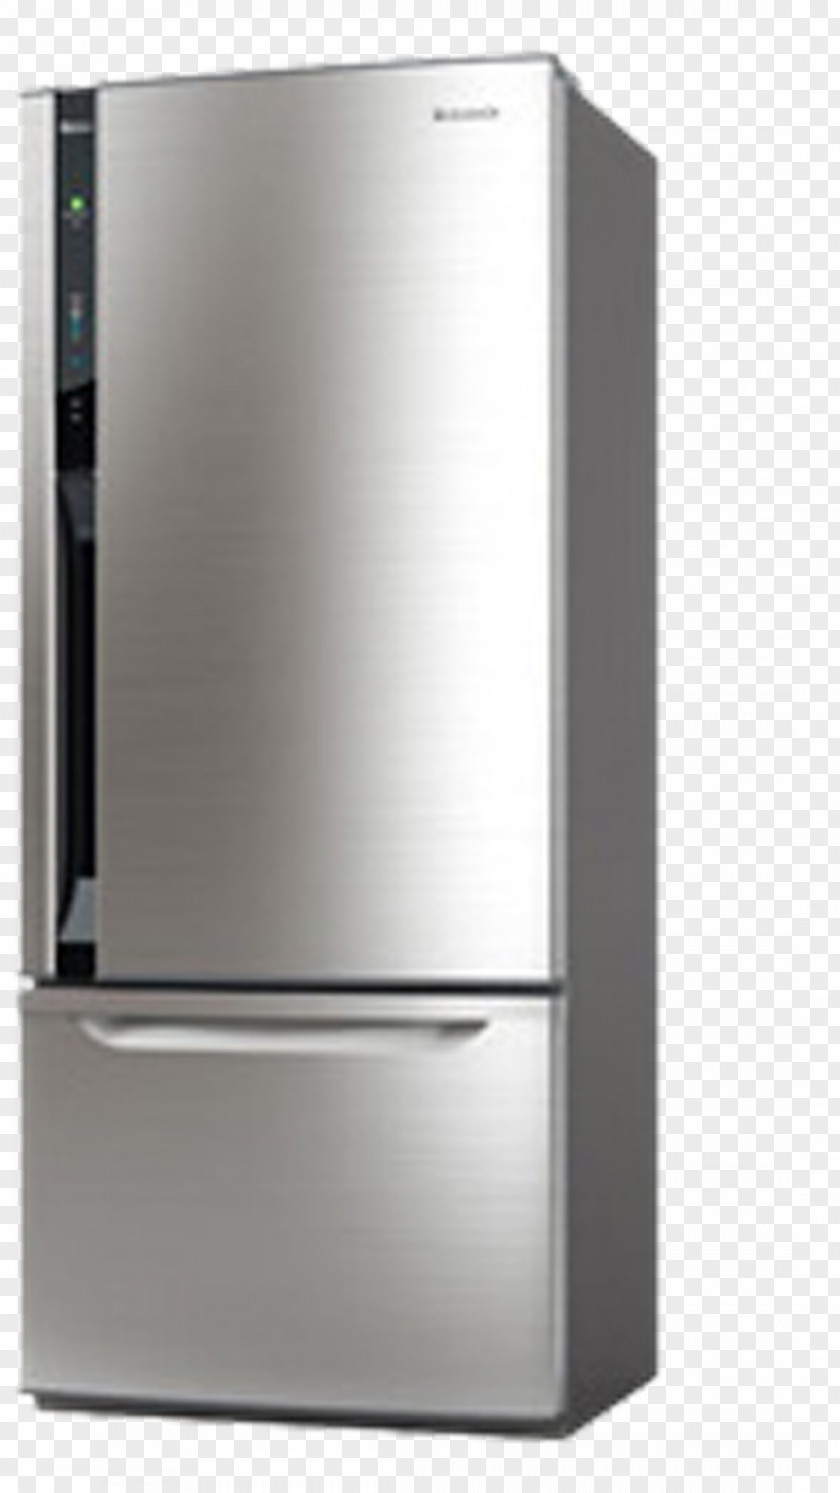 Refrigerator Panasonic Auto-defrost Home Appliance Direct Cool PNG